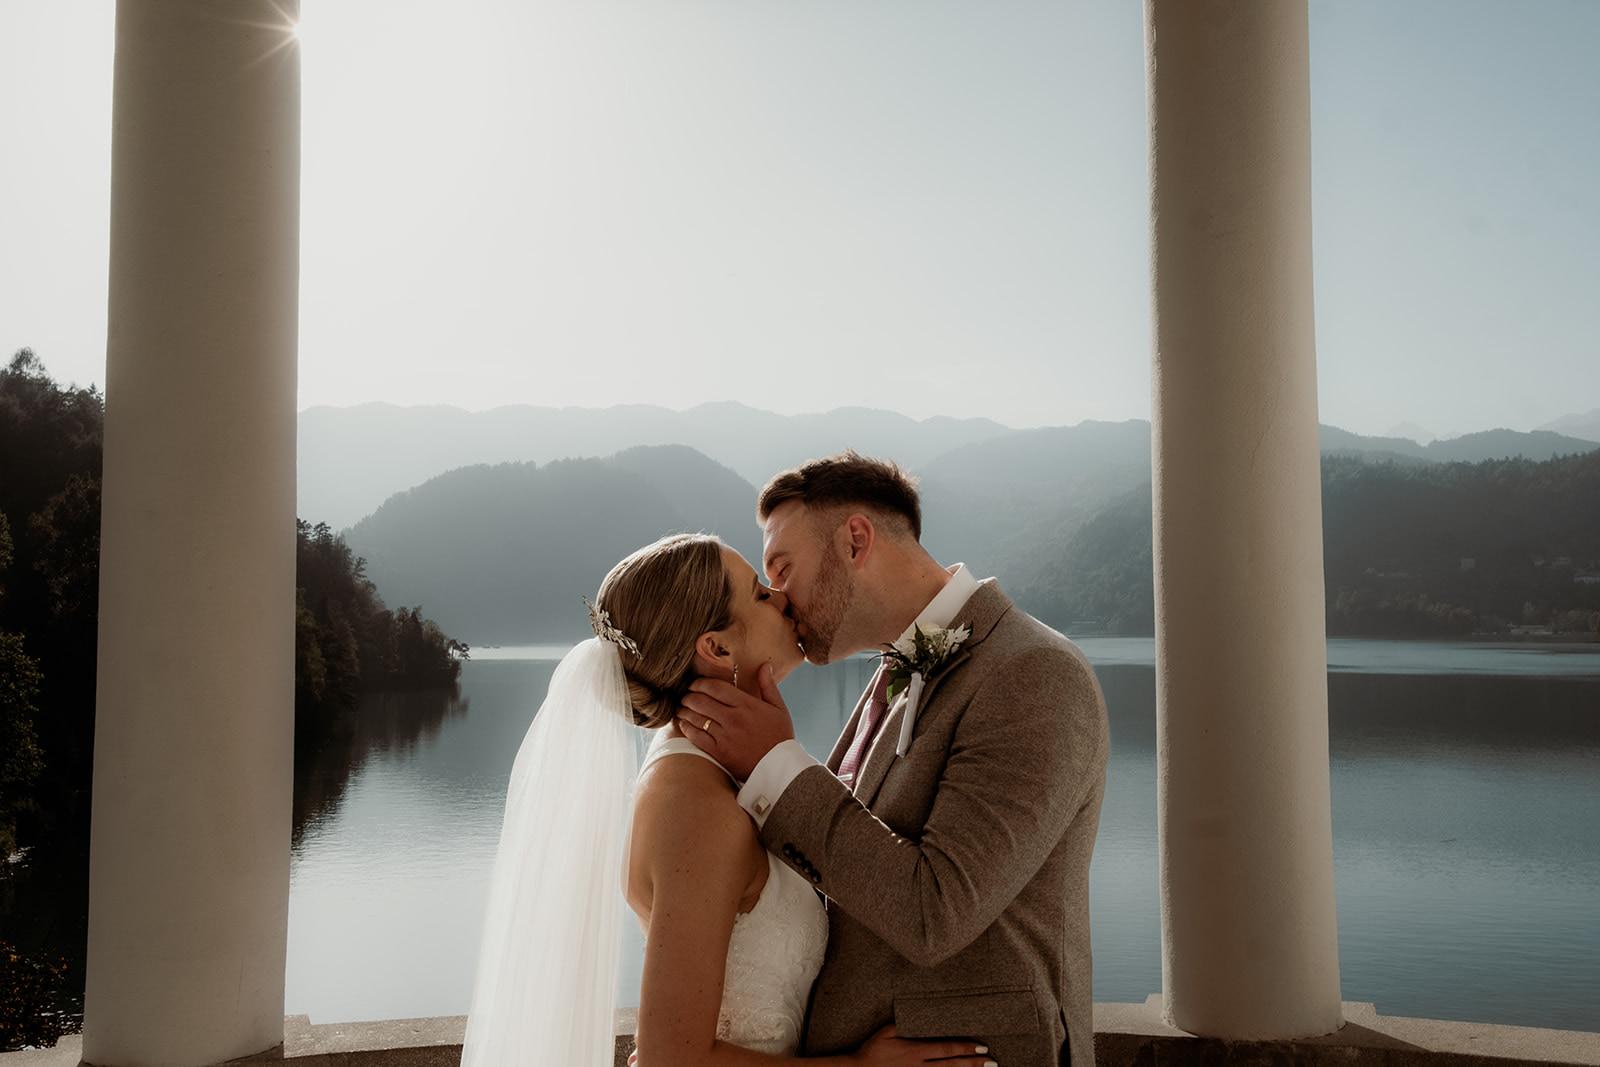 Bride and Groom share a kiss with Church on the Island in the back ground on Lake Bled Slovenia